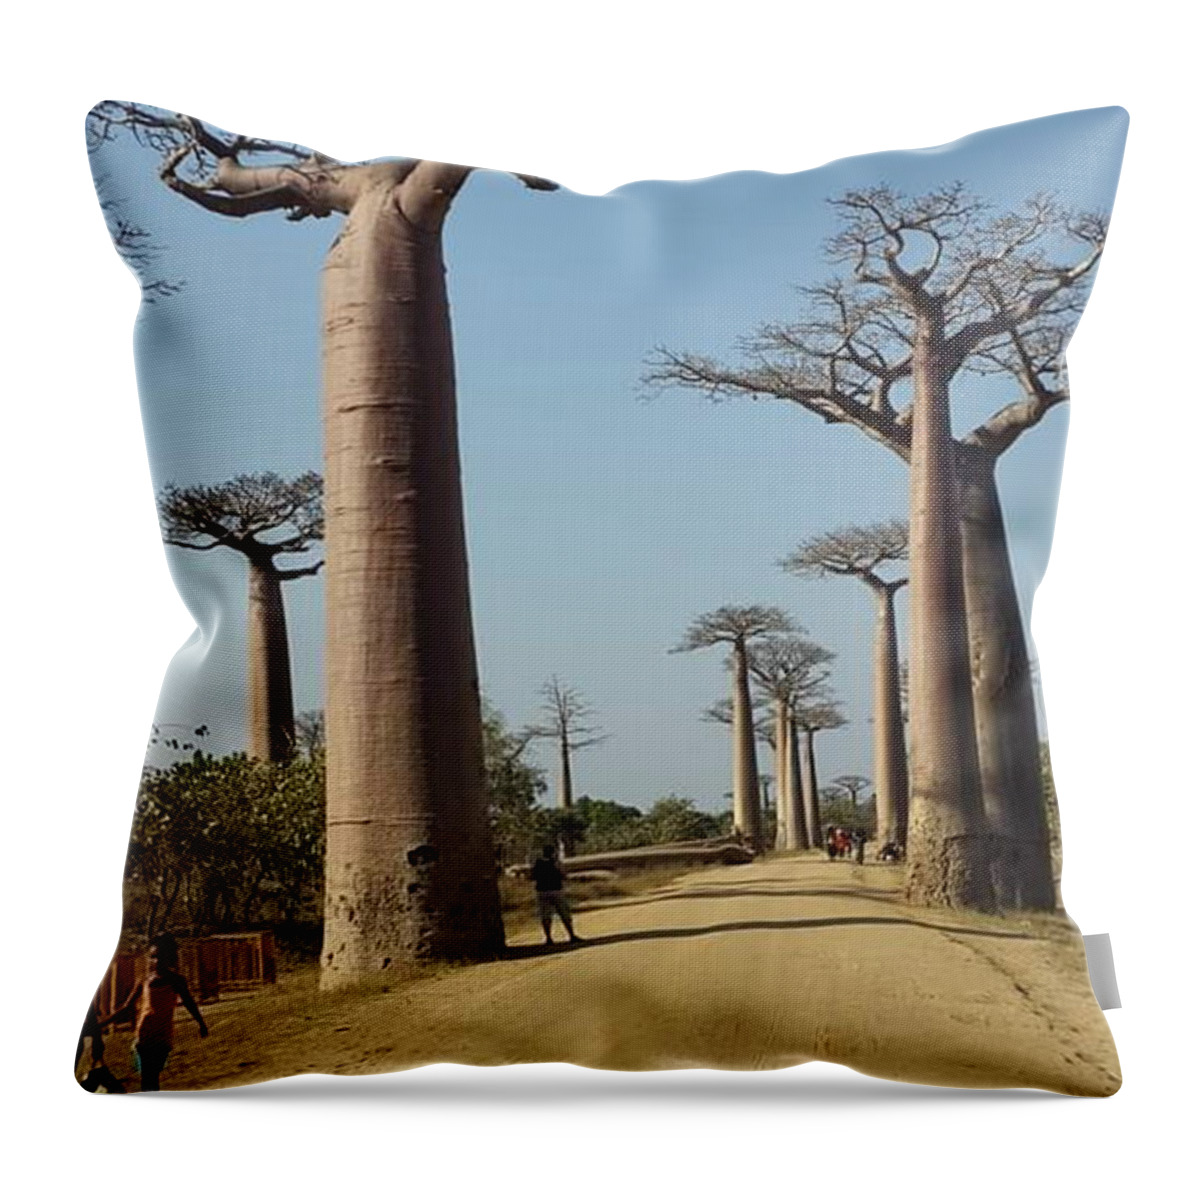 All Throw Pillow featuring the digital art The Road in Baobab Alley in Madagascar KN49 by Art Inspirity